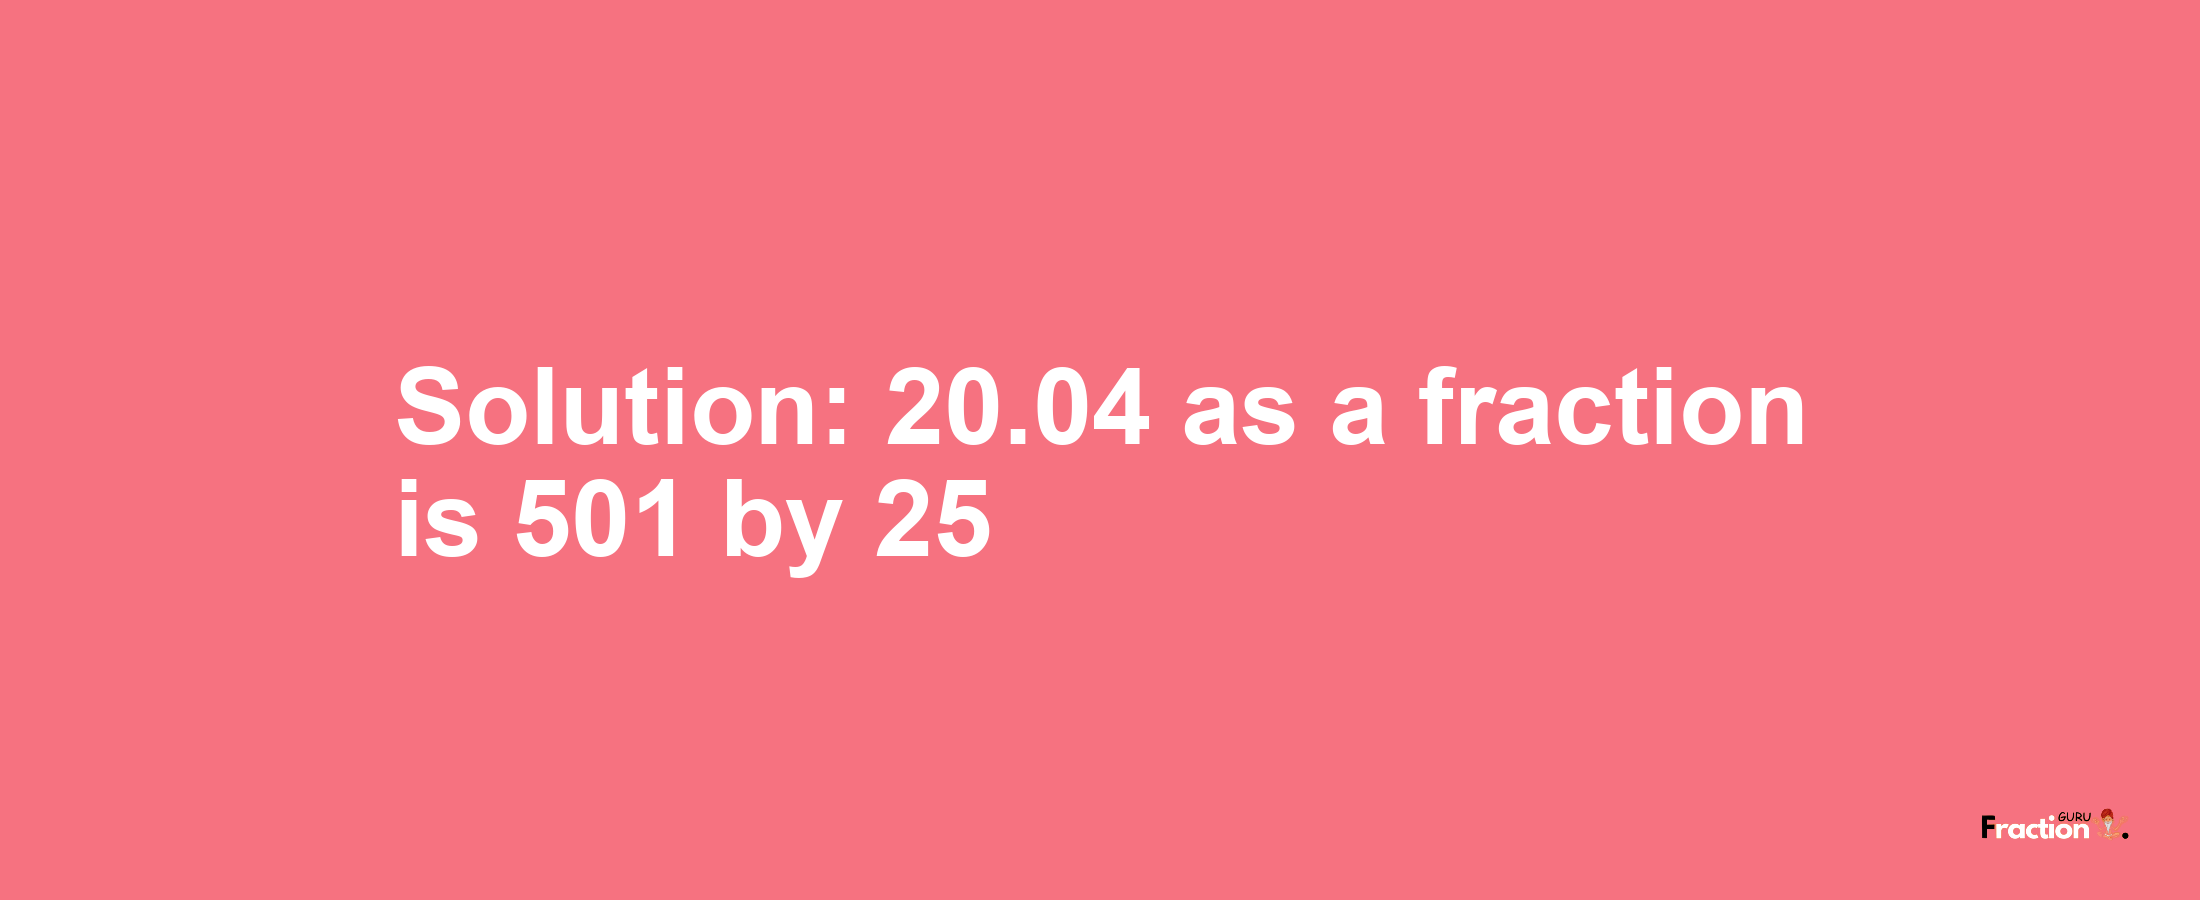 Solution:20.04 as a fraction is 501/25